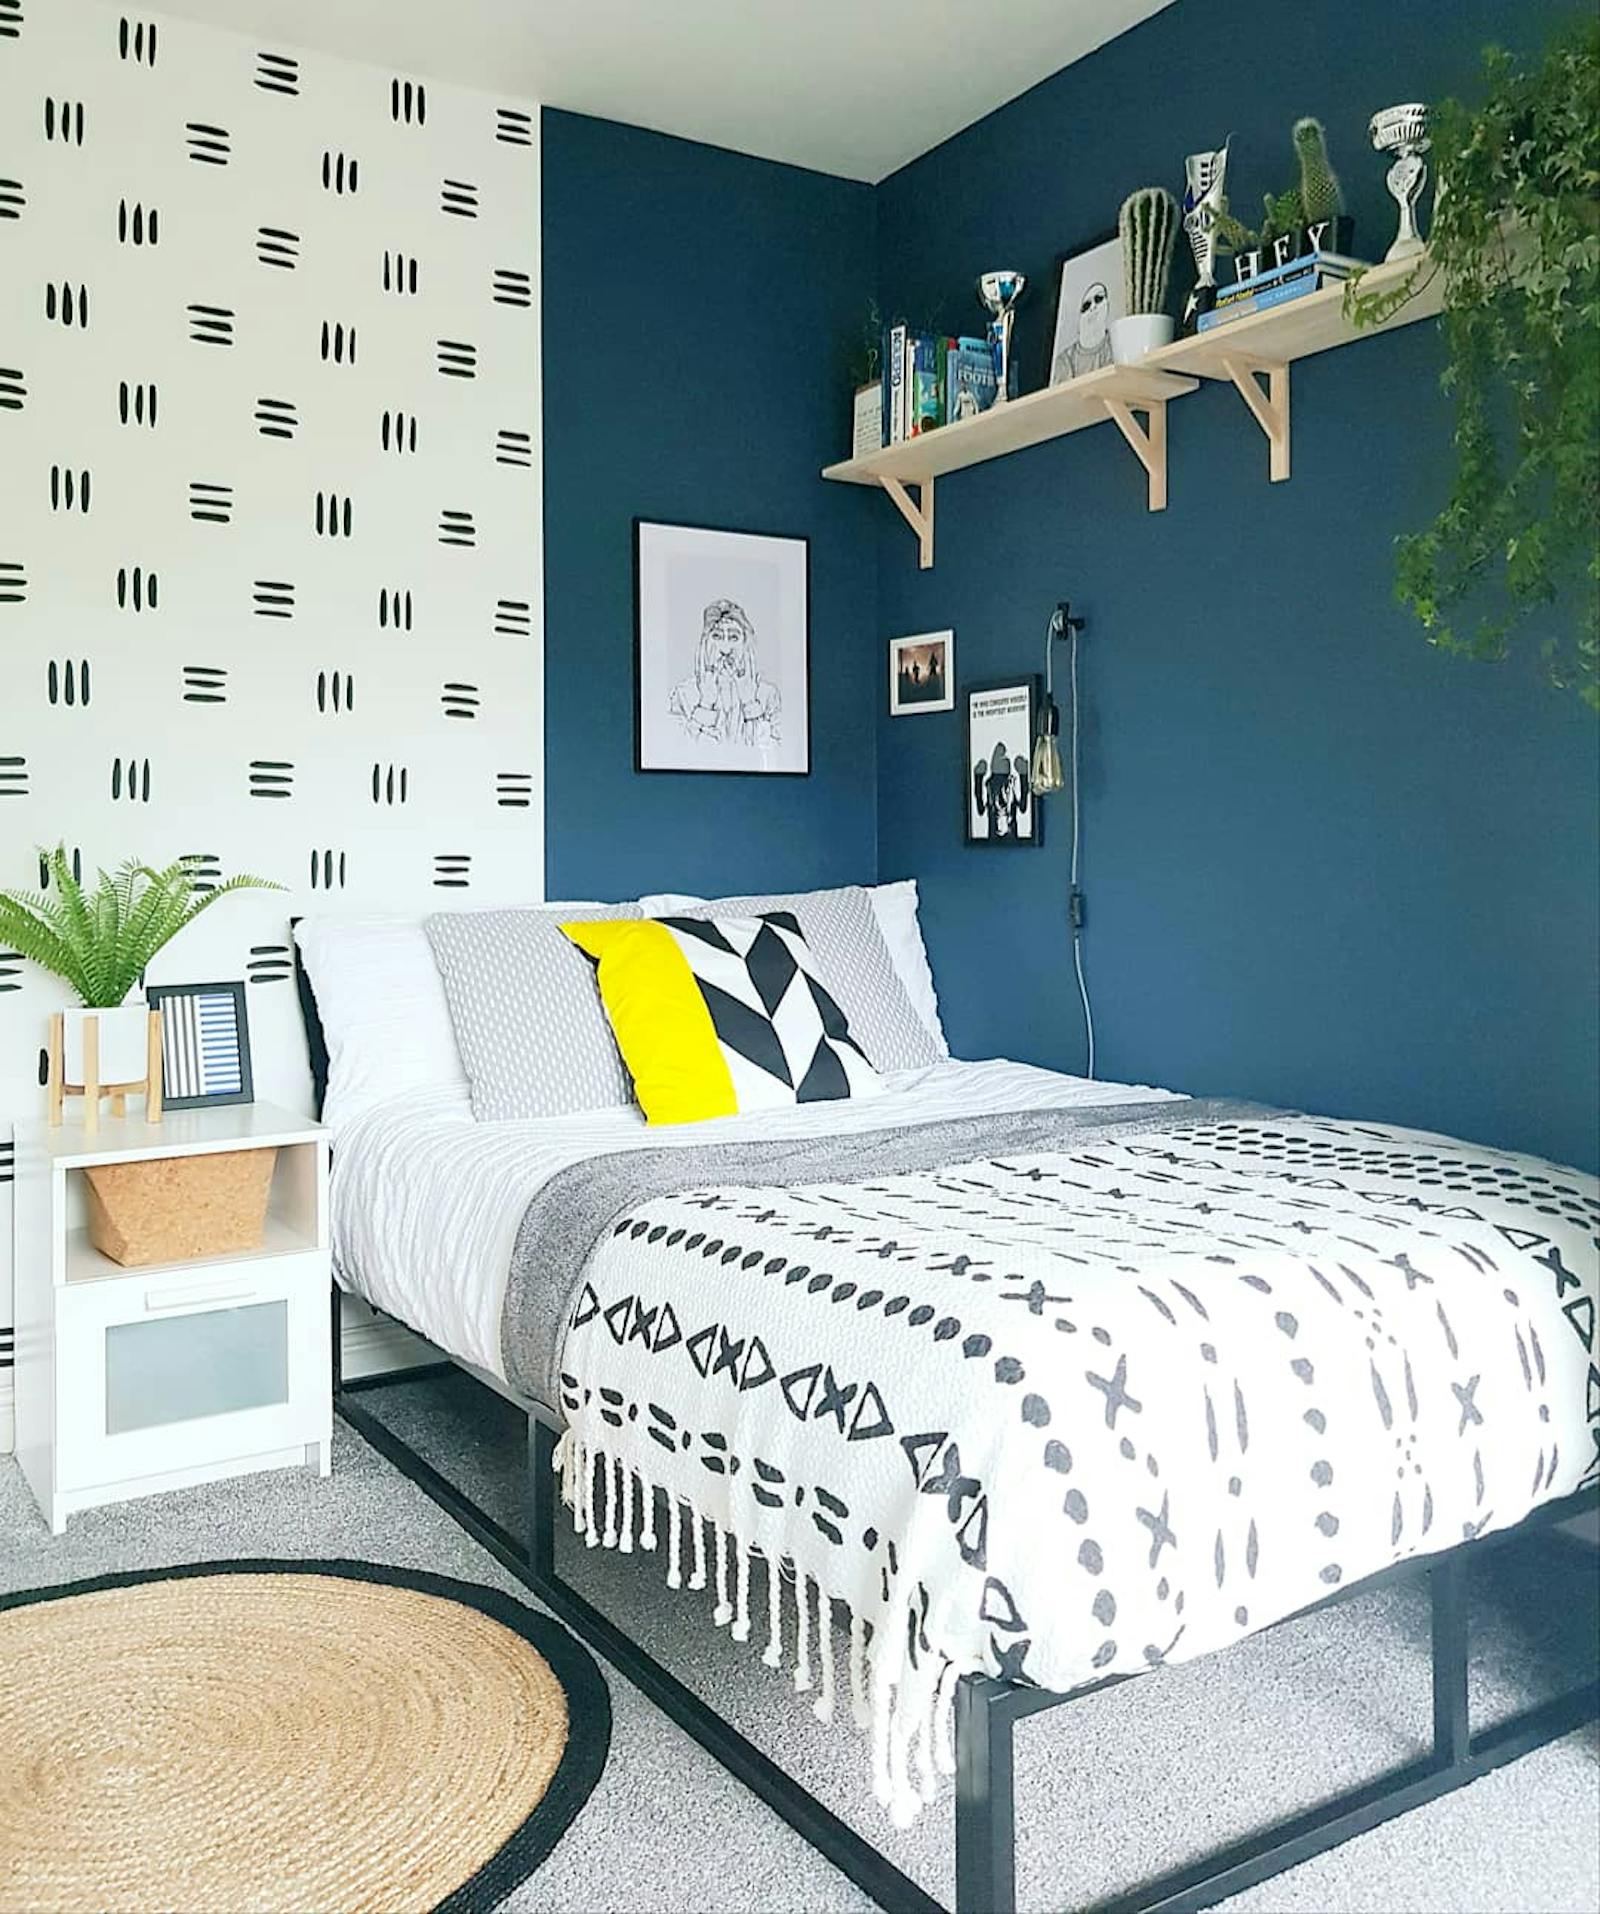 Luxury grey and teal bedroom The Best Paint Colours For Bedrooms Ask Experts Lick